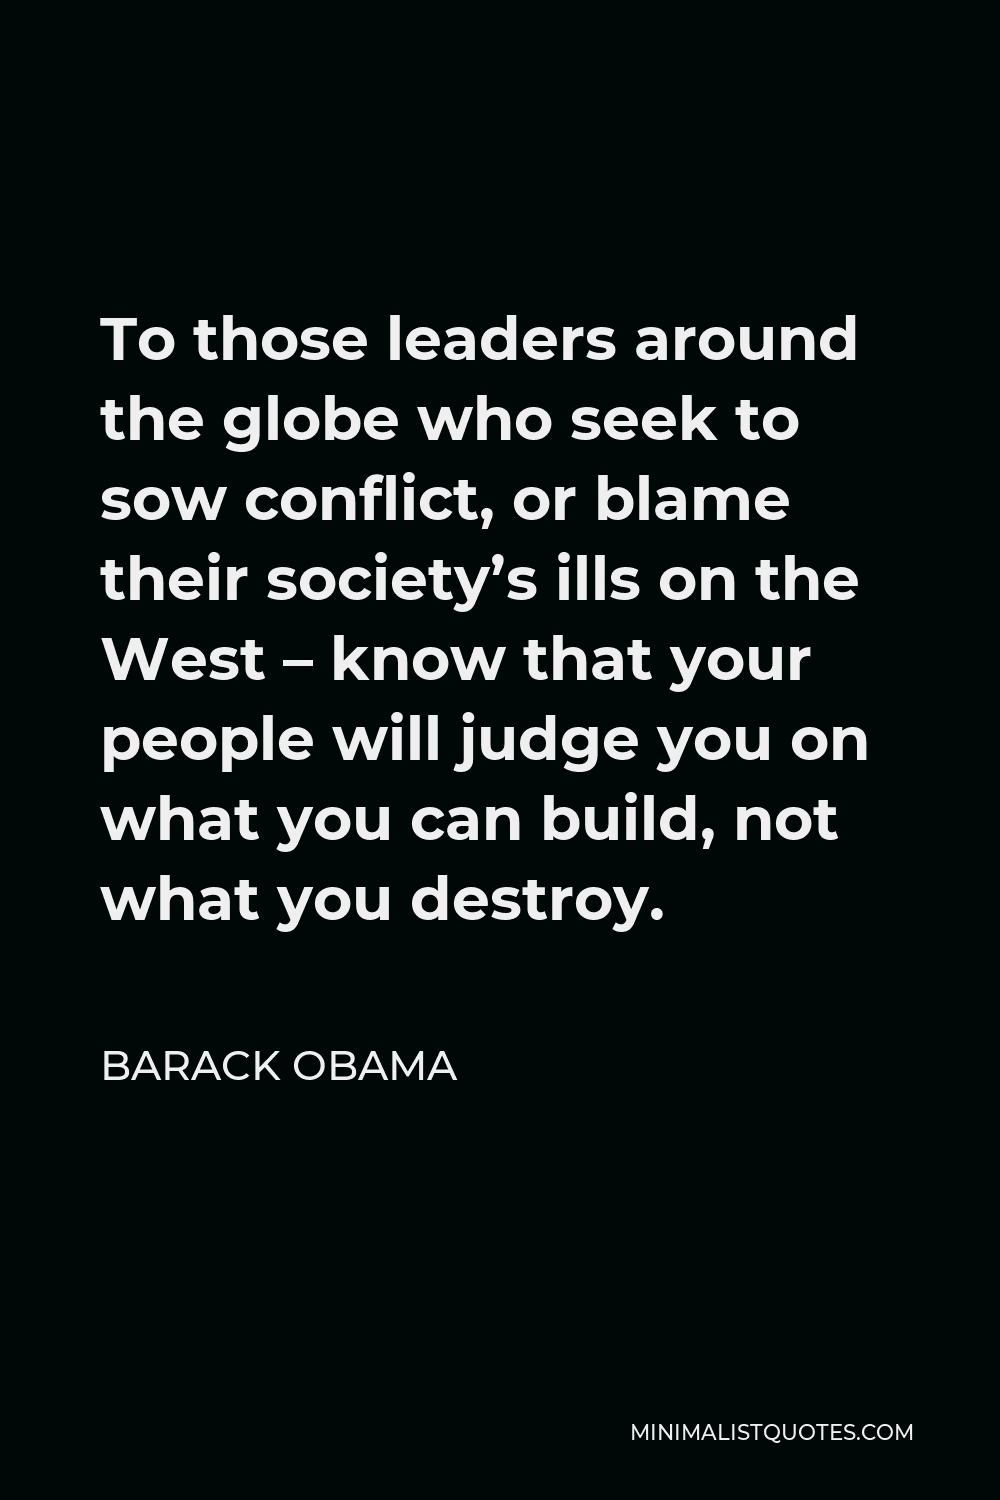 Barack Obama Quote - To those leaders around the globe who seek to sow conflict, or blame their society’s ills on the West – know that your people will judge you on what you can build, not what you destroy.